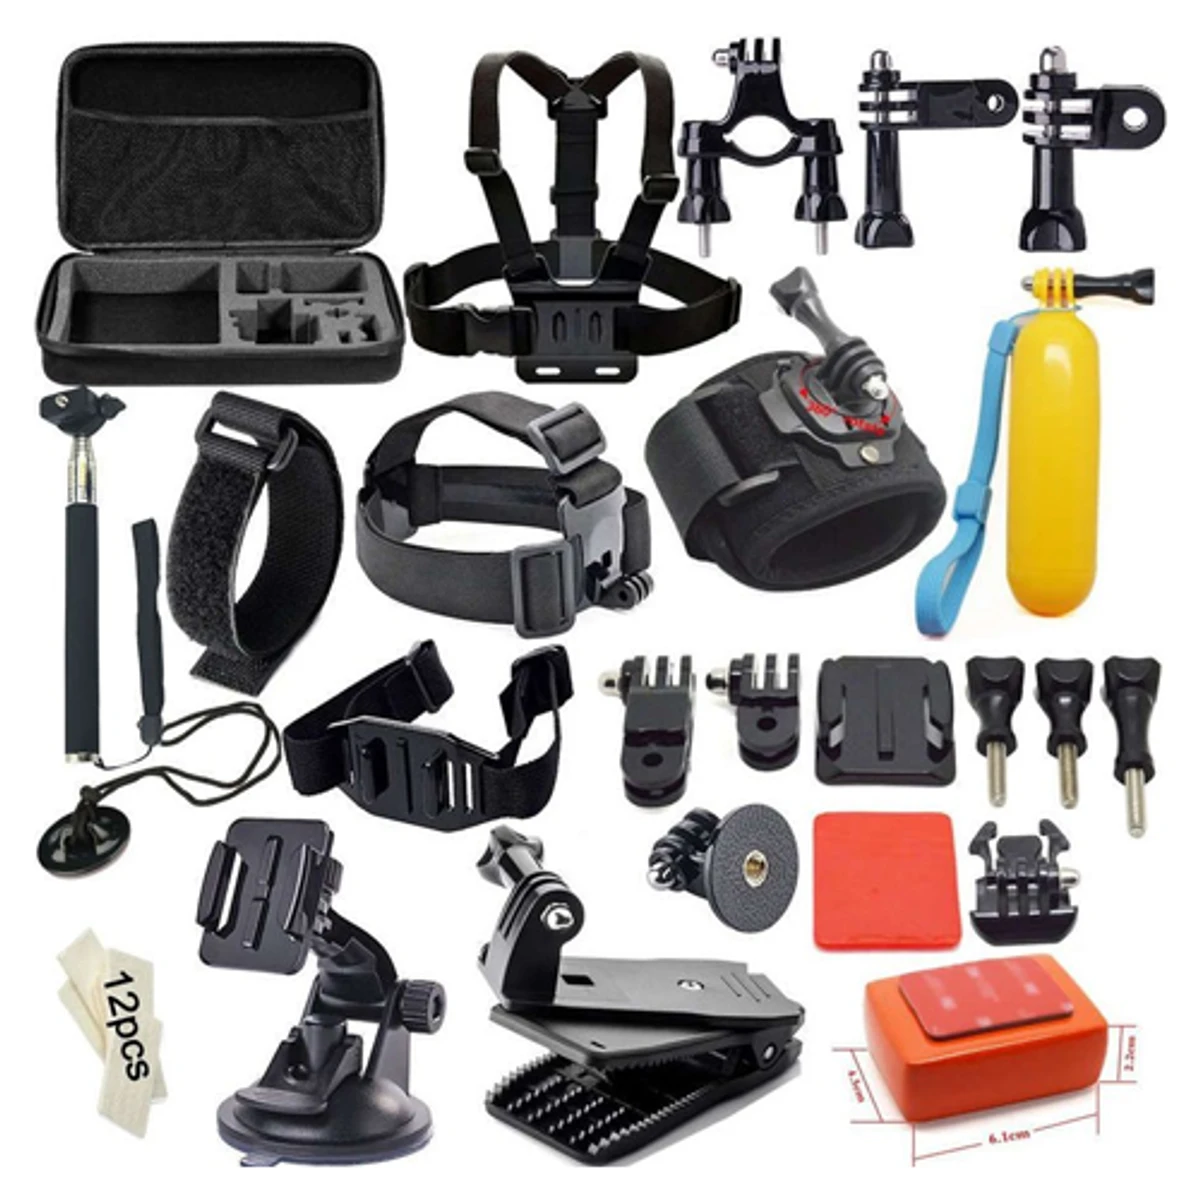 46-In-1 Accessories Kit For GoPro And Other Action Camera